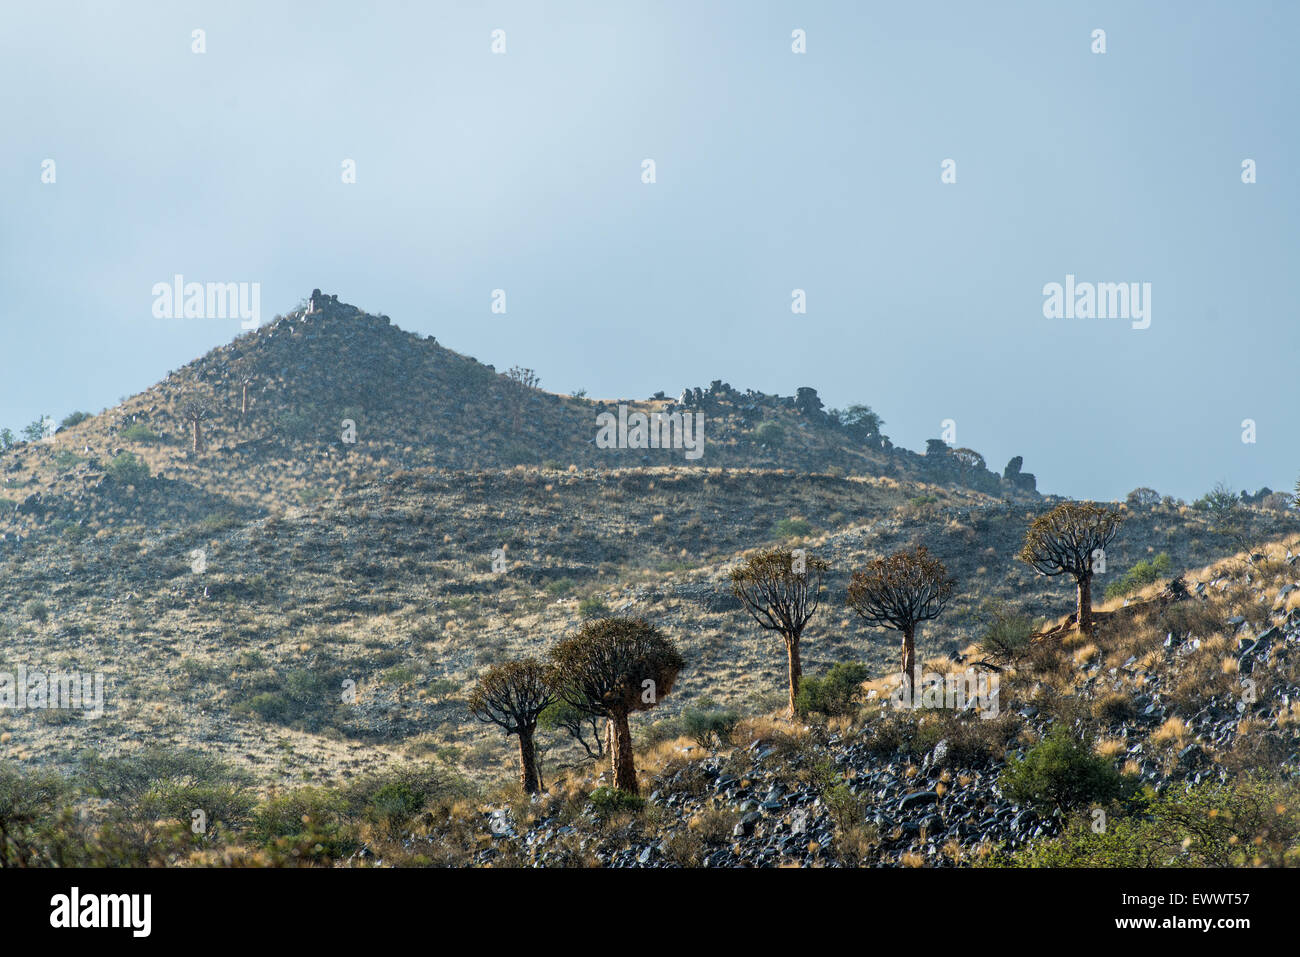 Keetmanshoop, Namibia - Landscape with Quiver trees and brush in Africa during midday Stock Photo